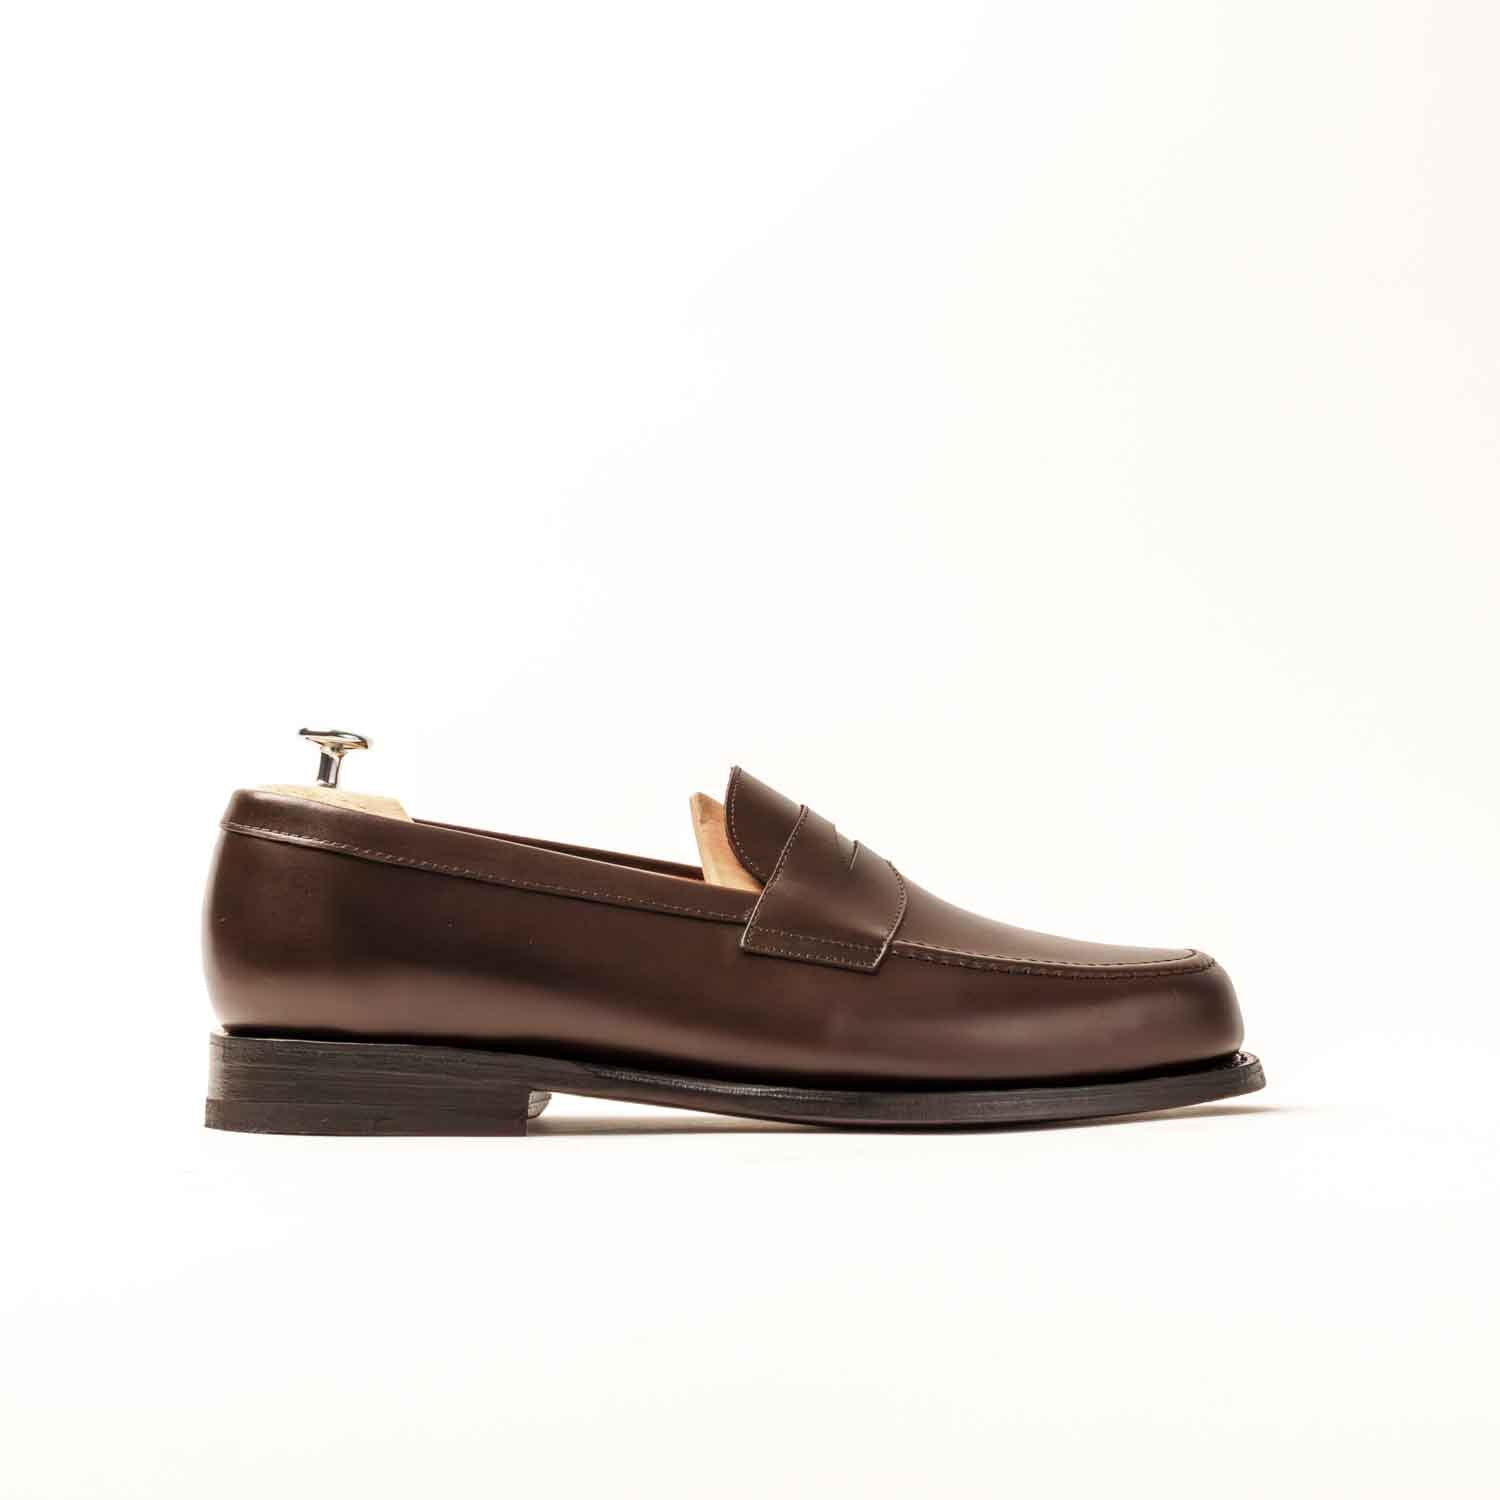 Penny Loafer - Chaussures Mocassin Cuir Marron